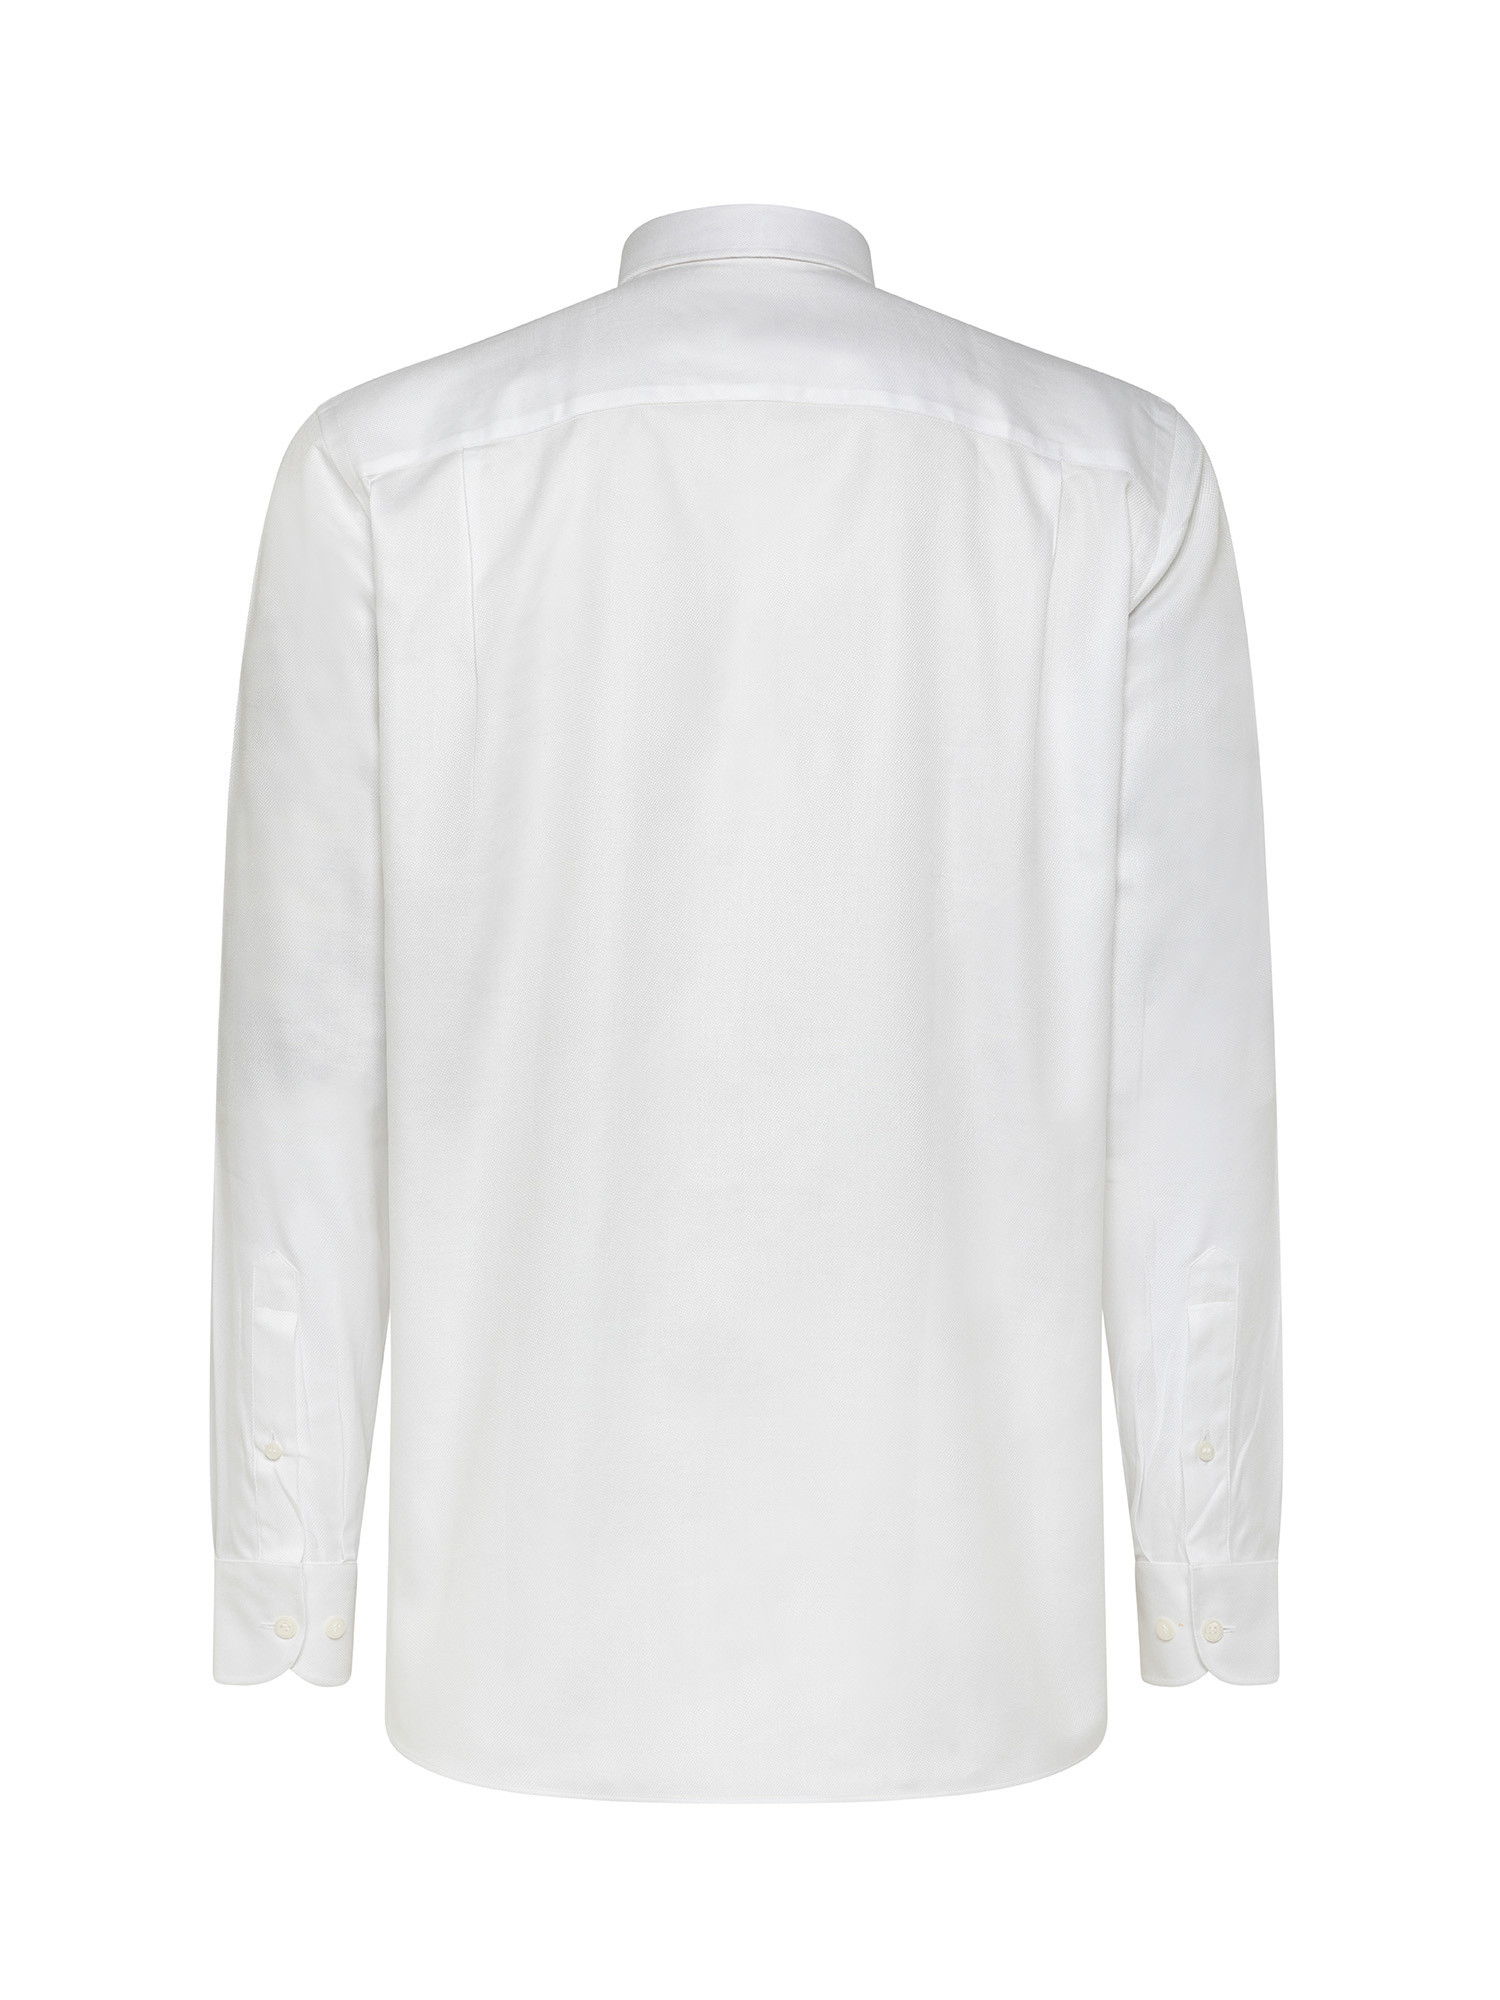 Regular fit shirt in pure cotton, White, large image number 2